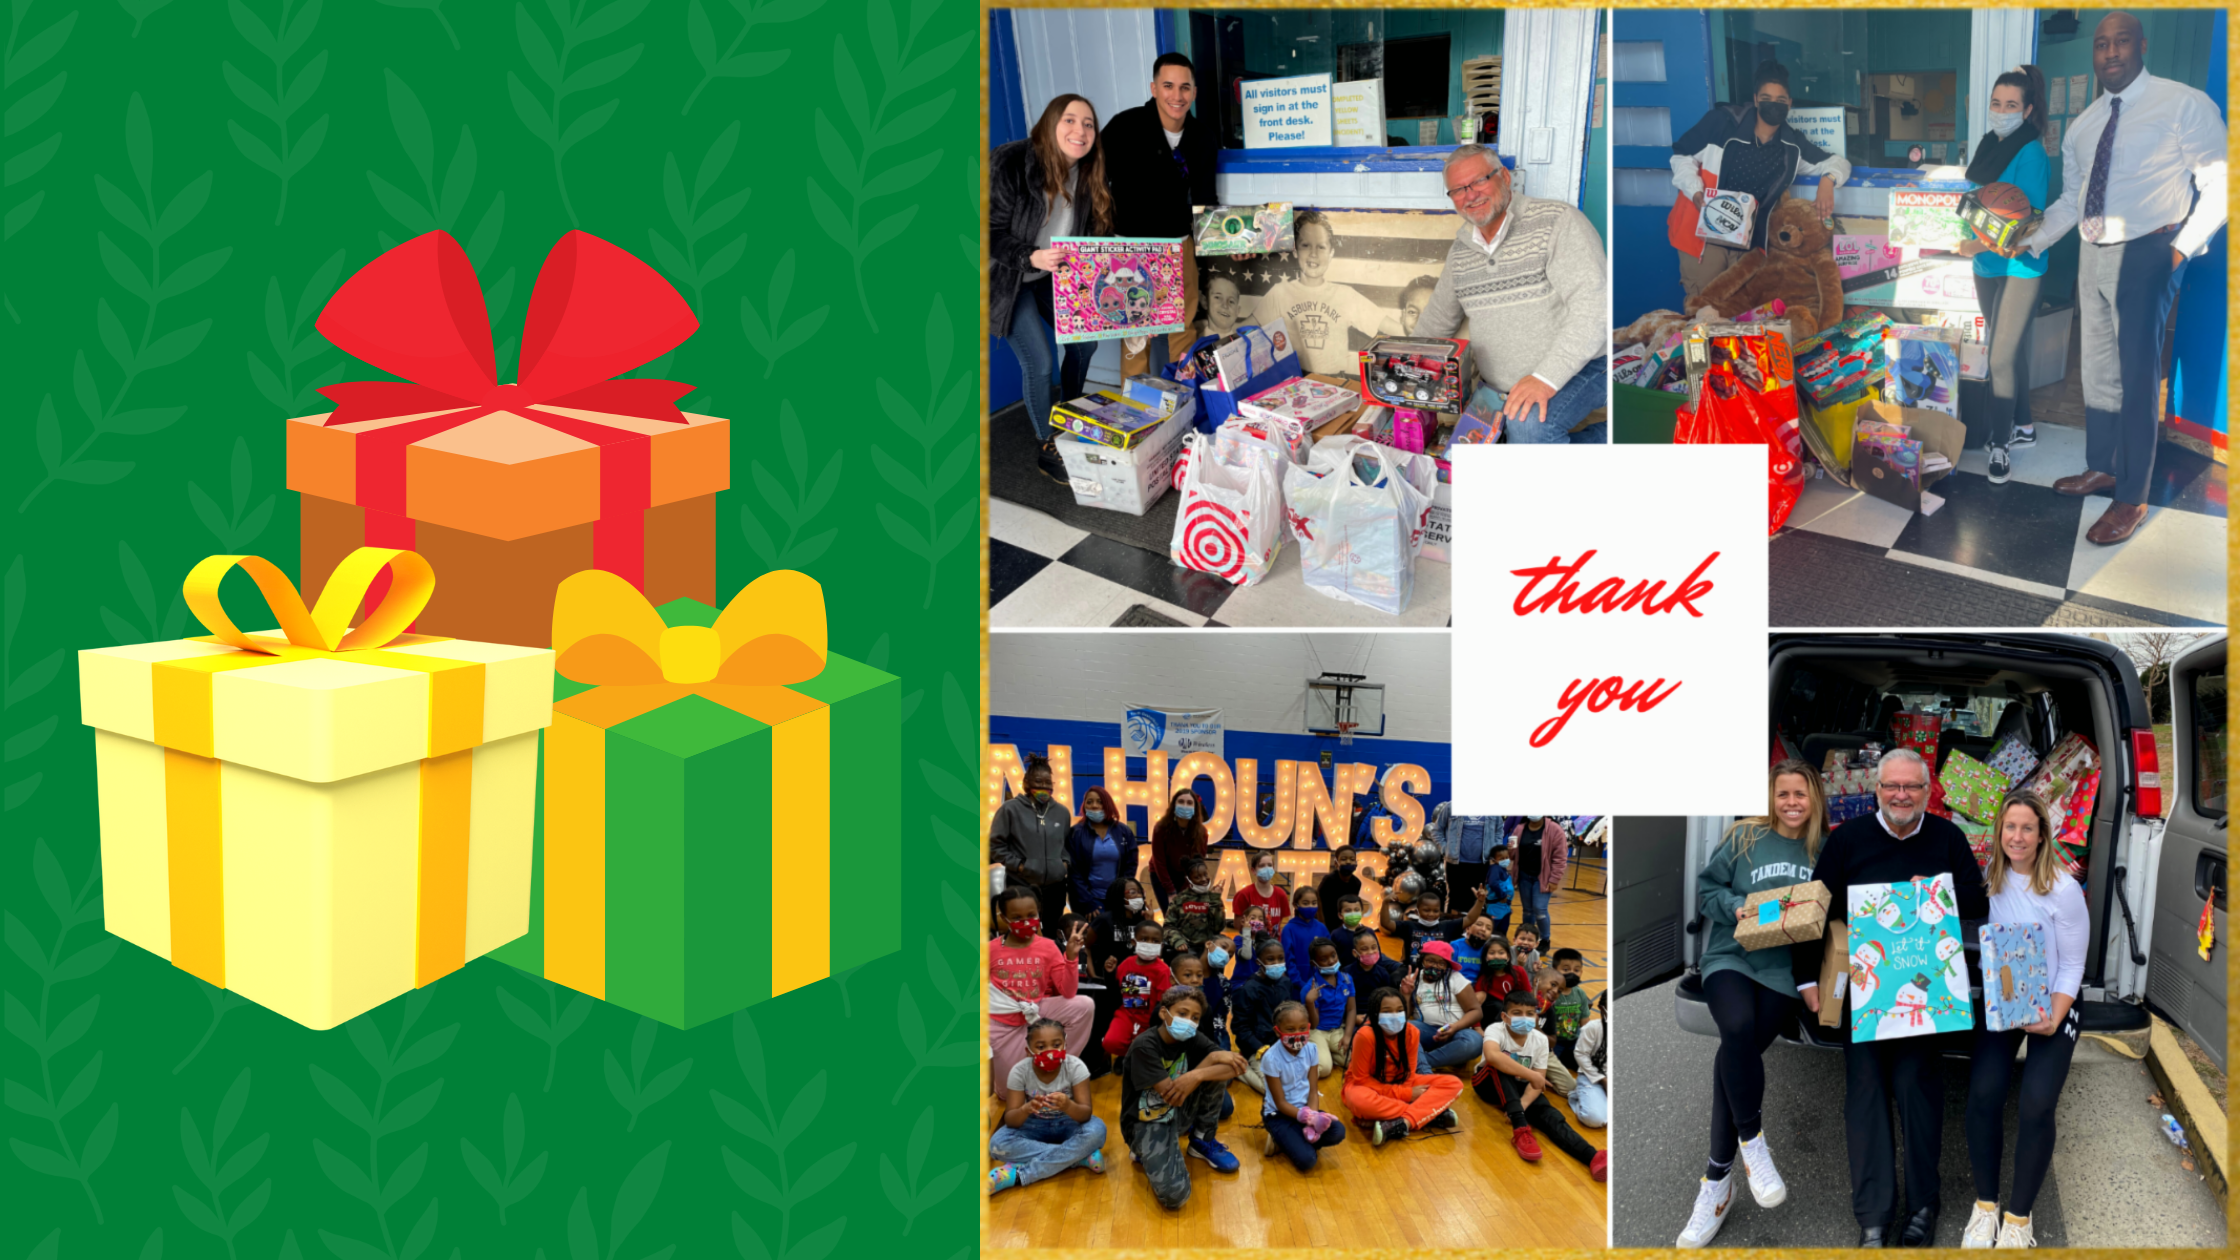 The Club thanks you for your generosity this Holiday Season